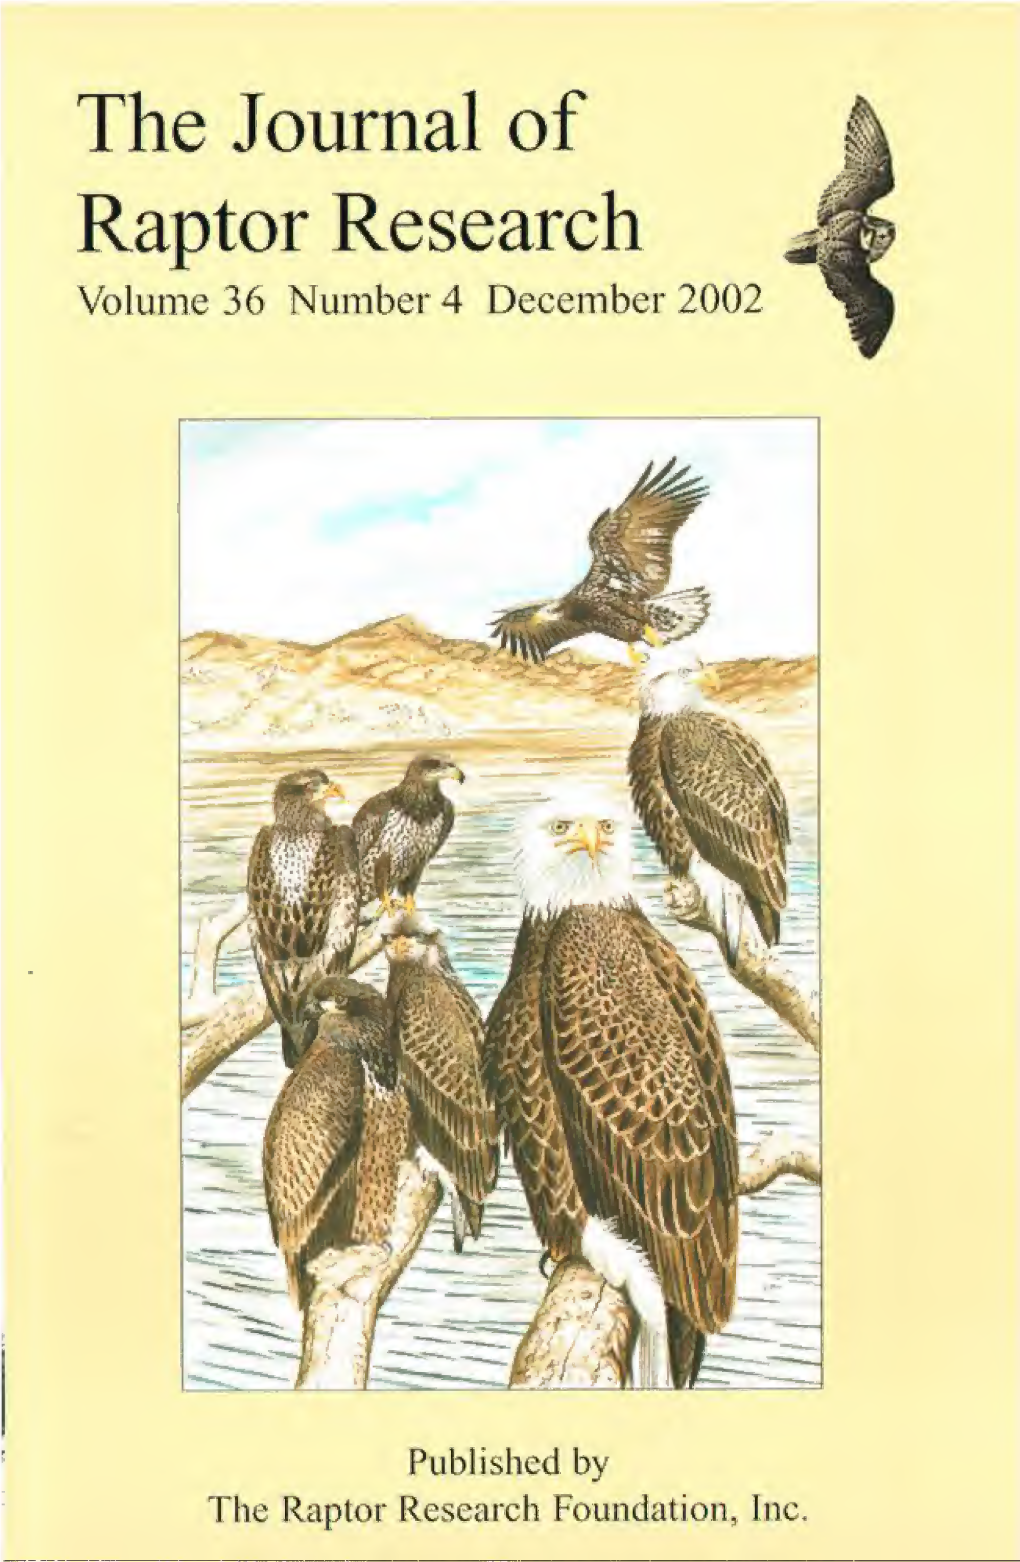 The Journal of Raptor Research Volume 36 Number 4 December 2002